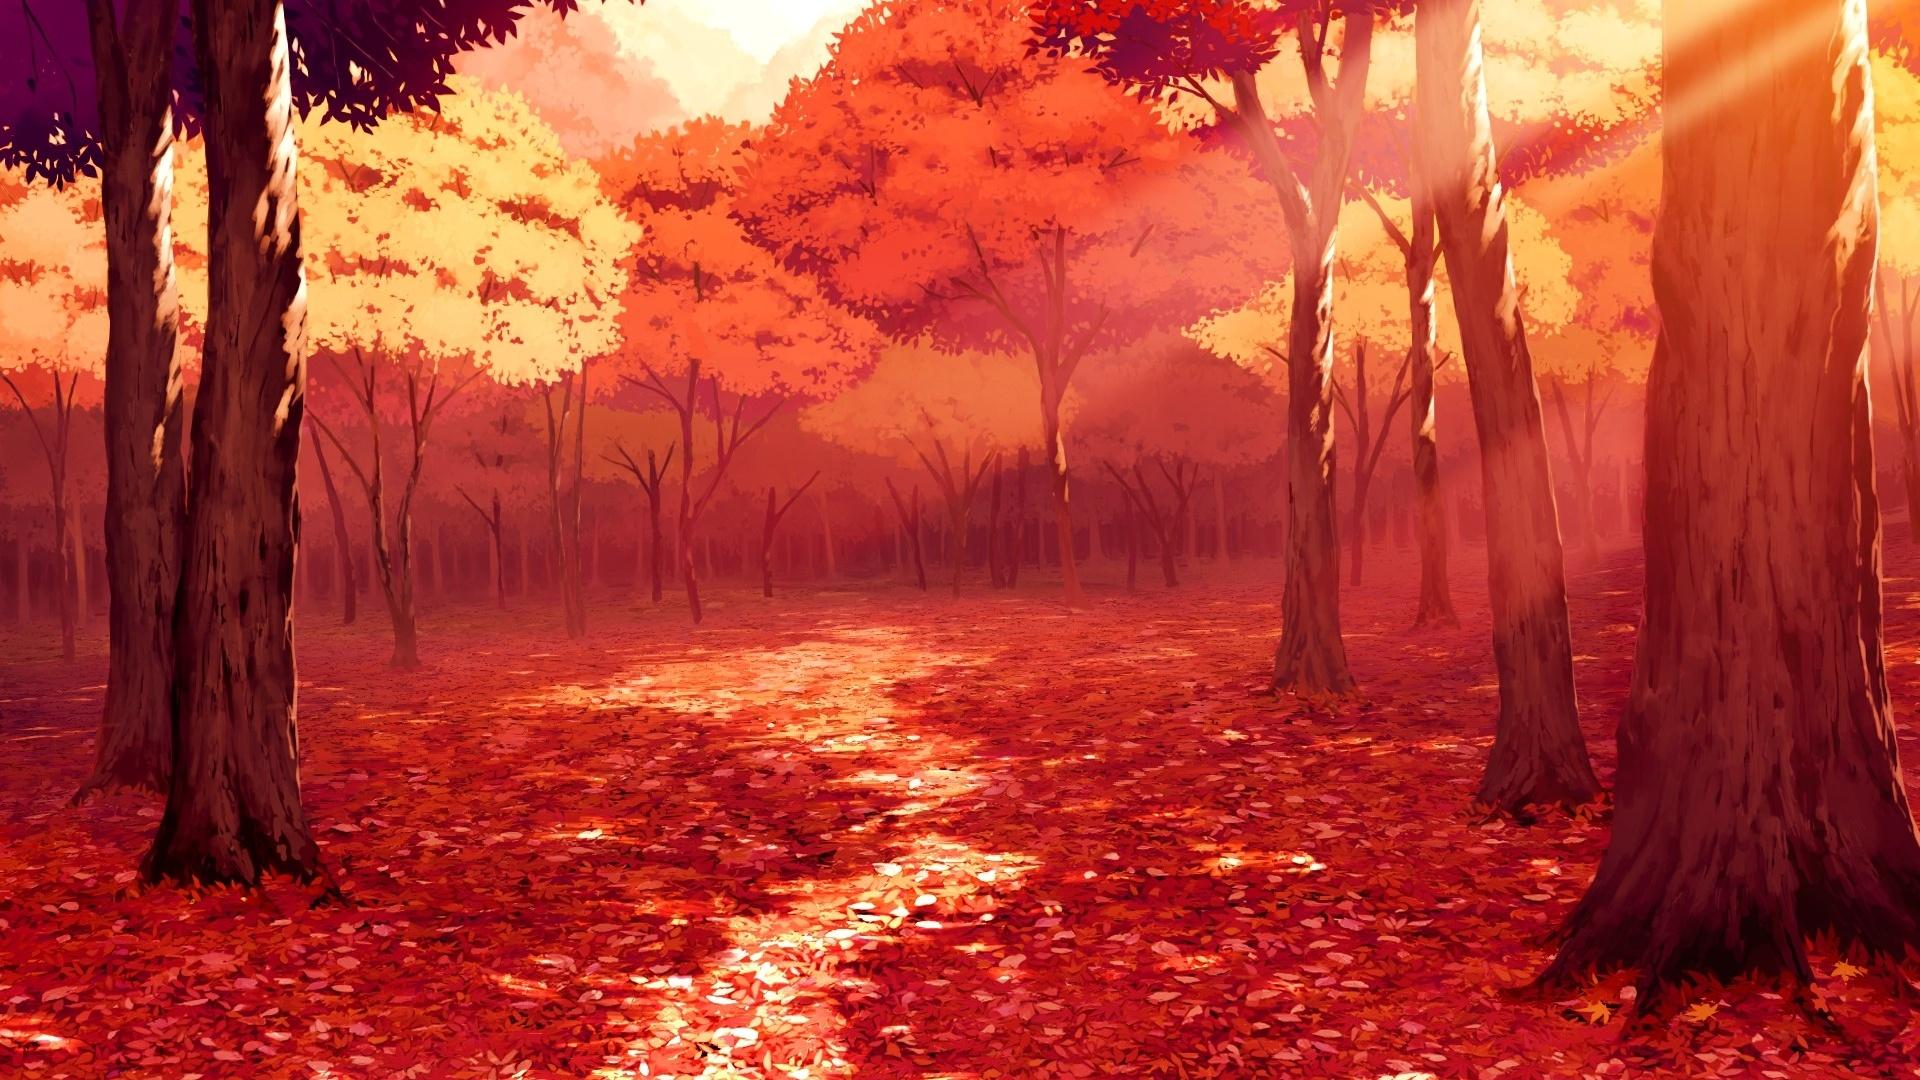 Download Gorgeous Anime Scenery Wallpapers 42590 1920x1080 px High